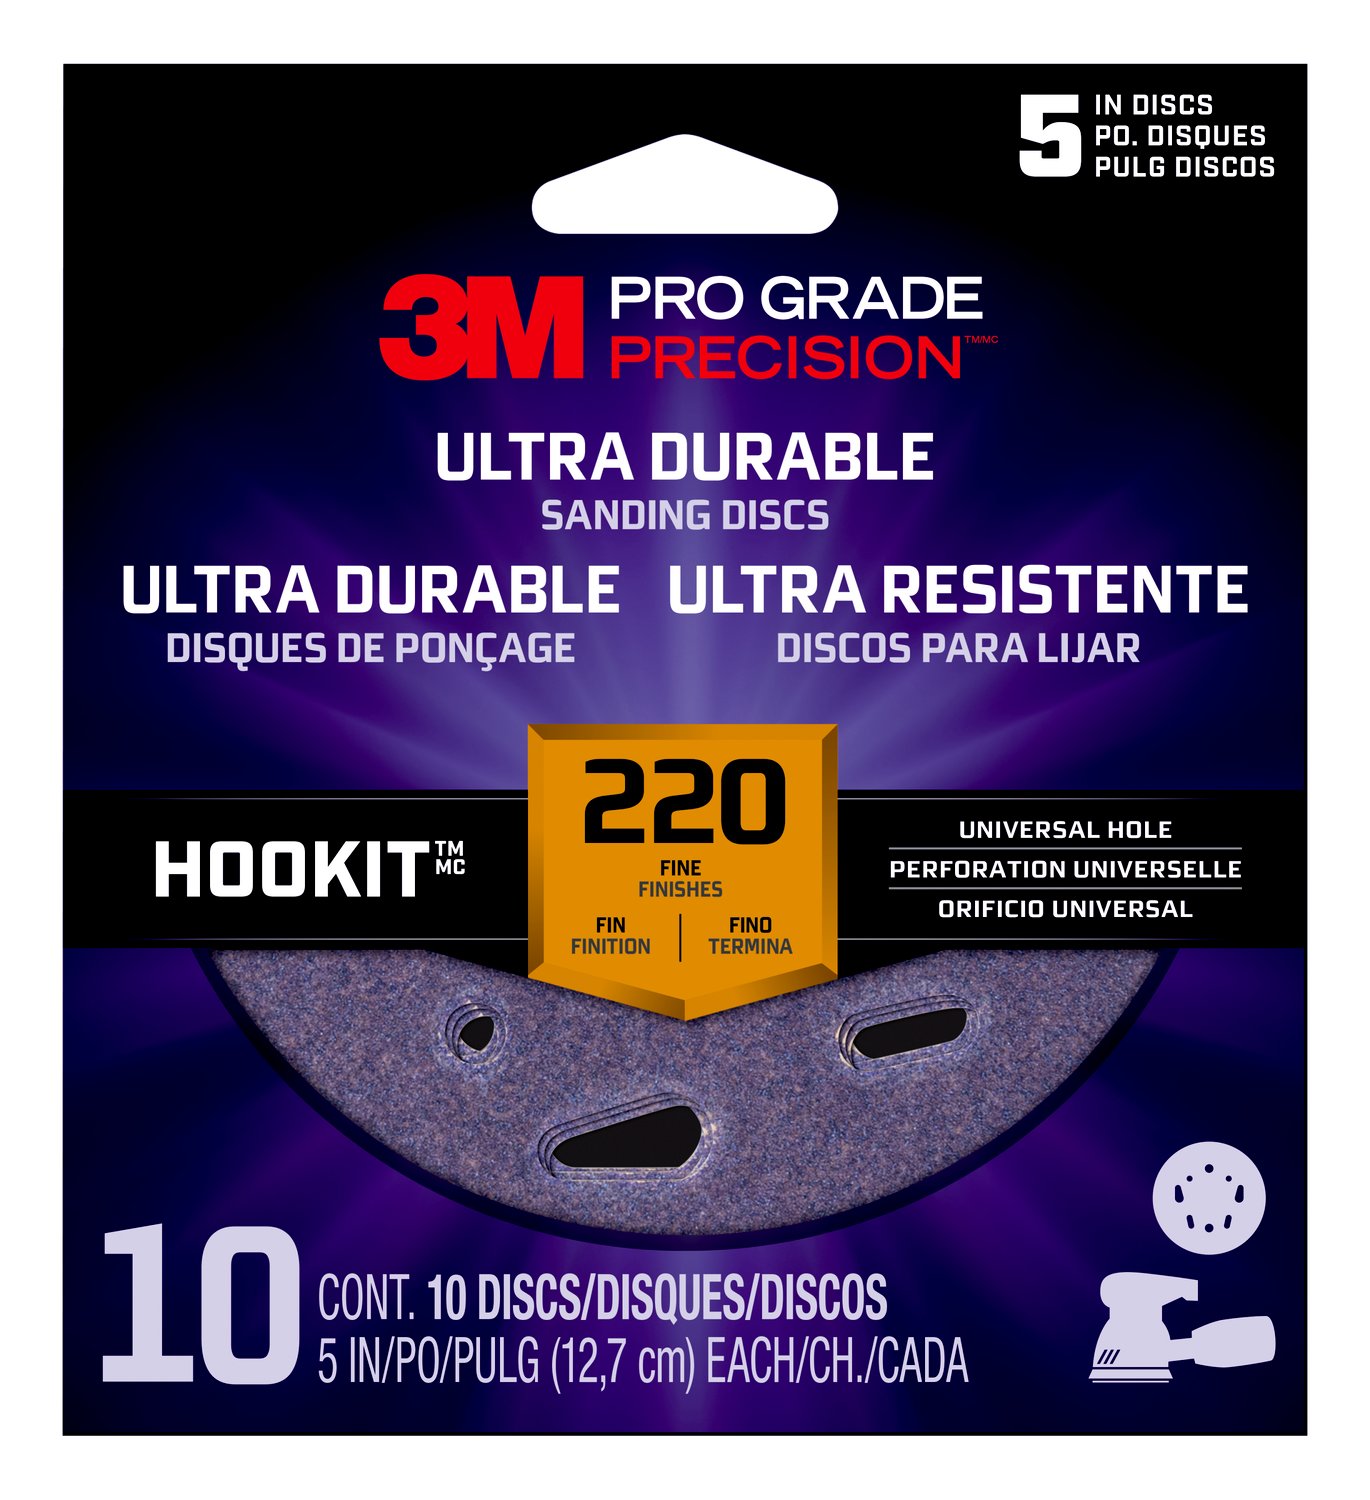 7100202878 - 3M Pro Grade Precision Ultra Durable Universal Hole Sanding Disc
DUH5220TRI-10I, 5 inch UH, 220, 10/pack